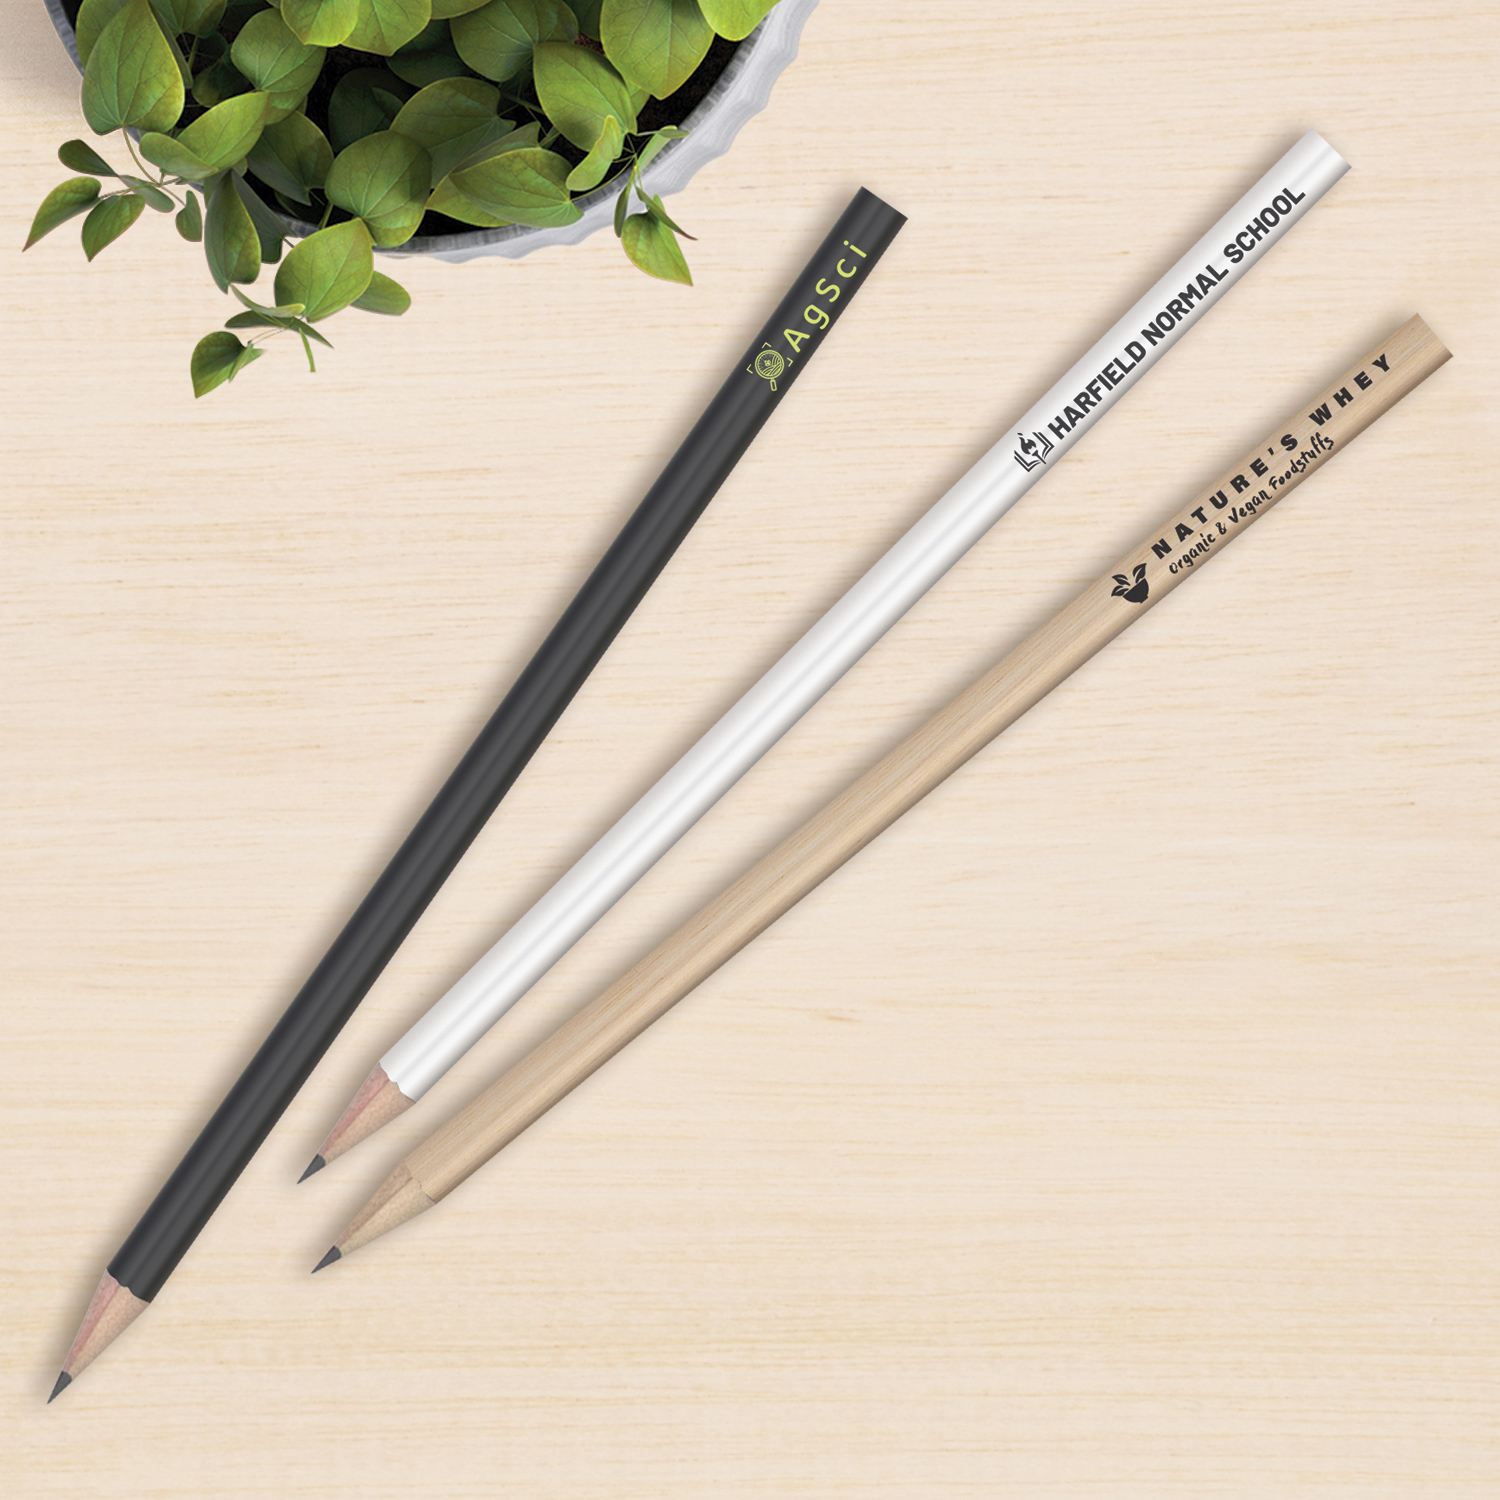 HB Pencil Features